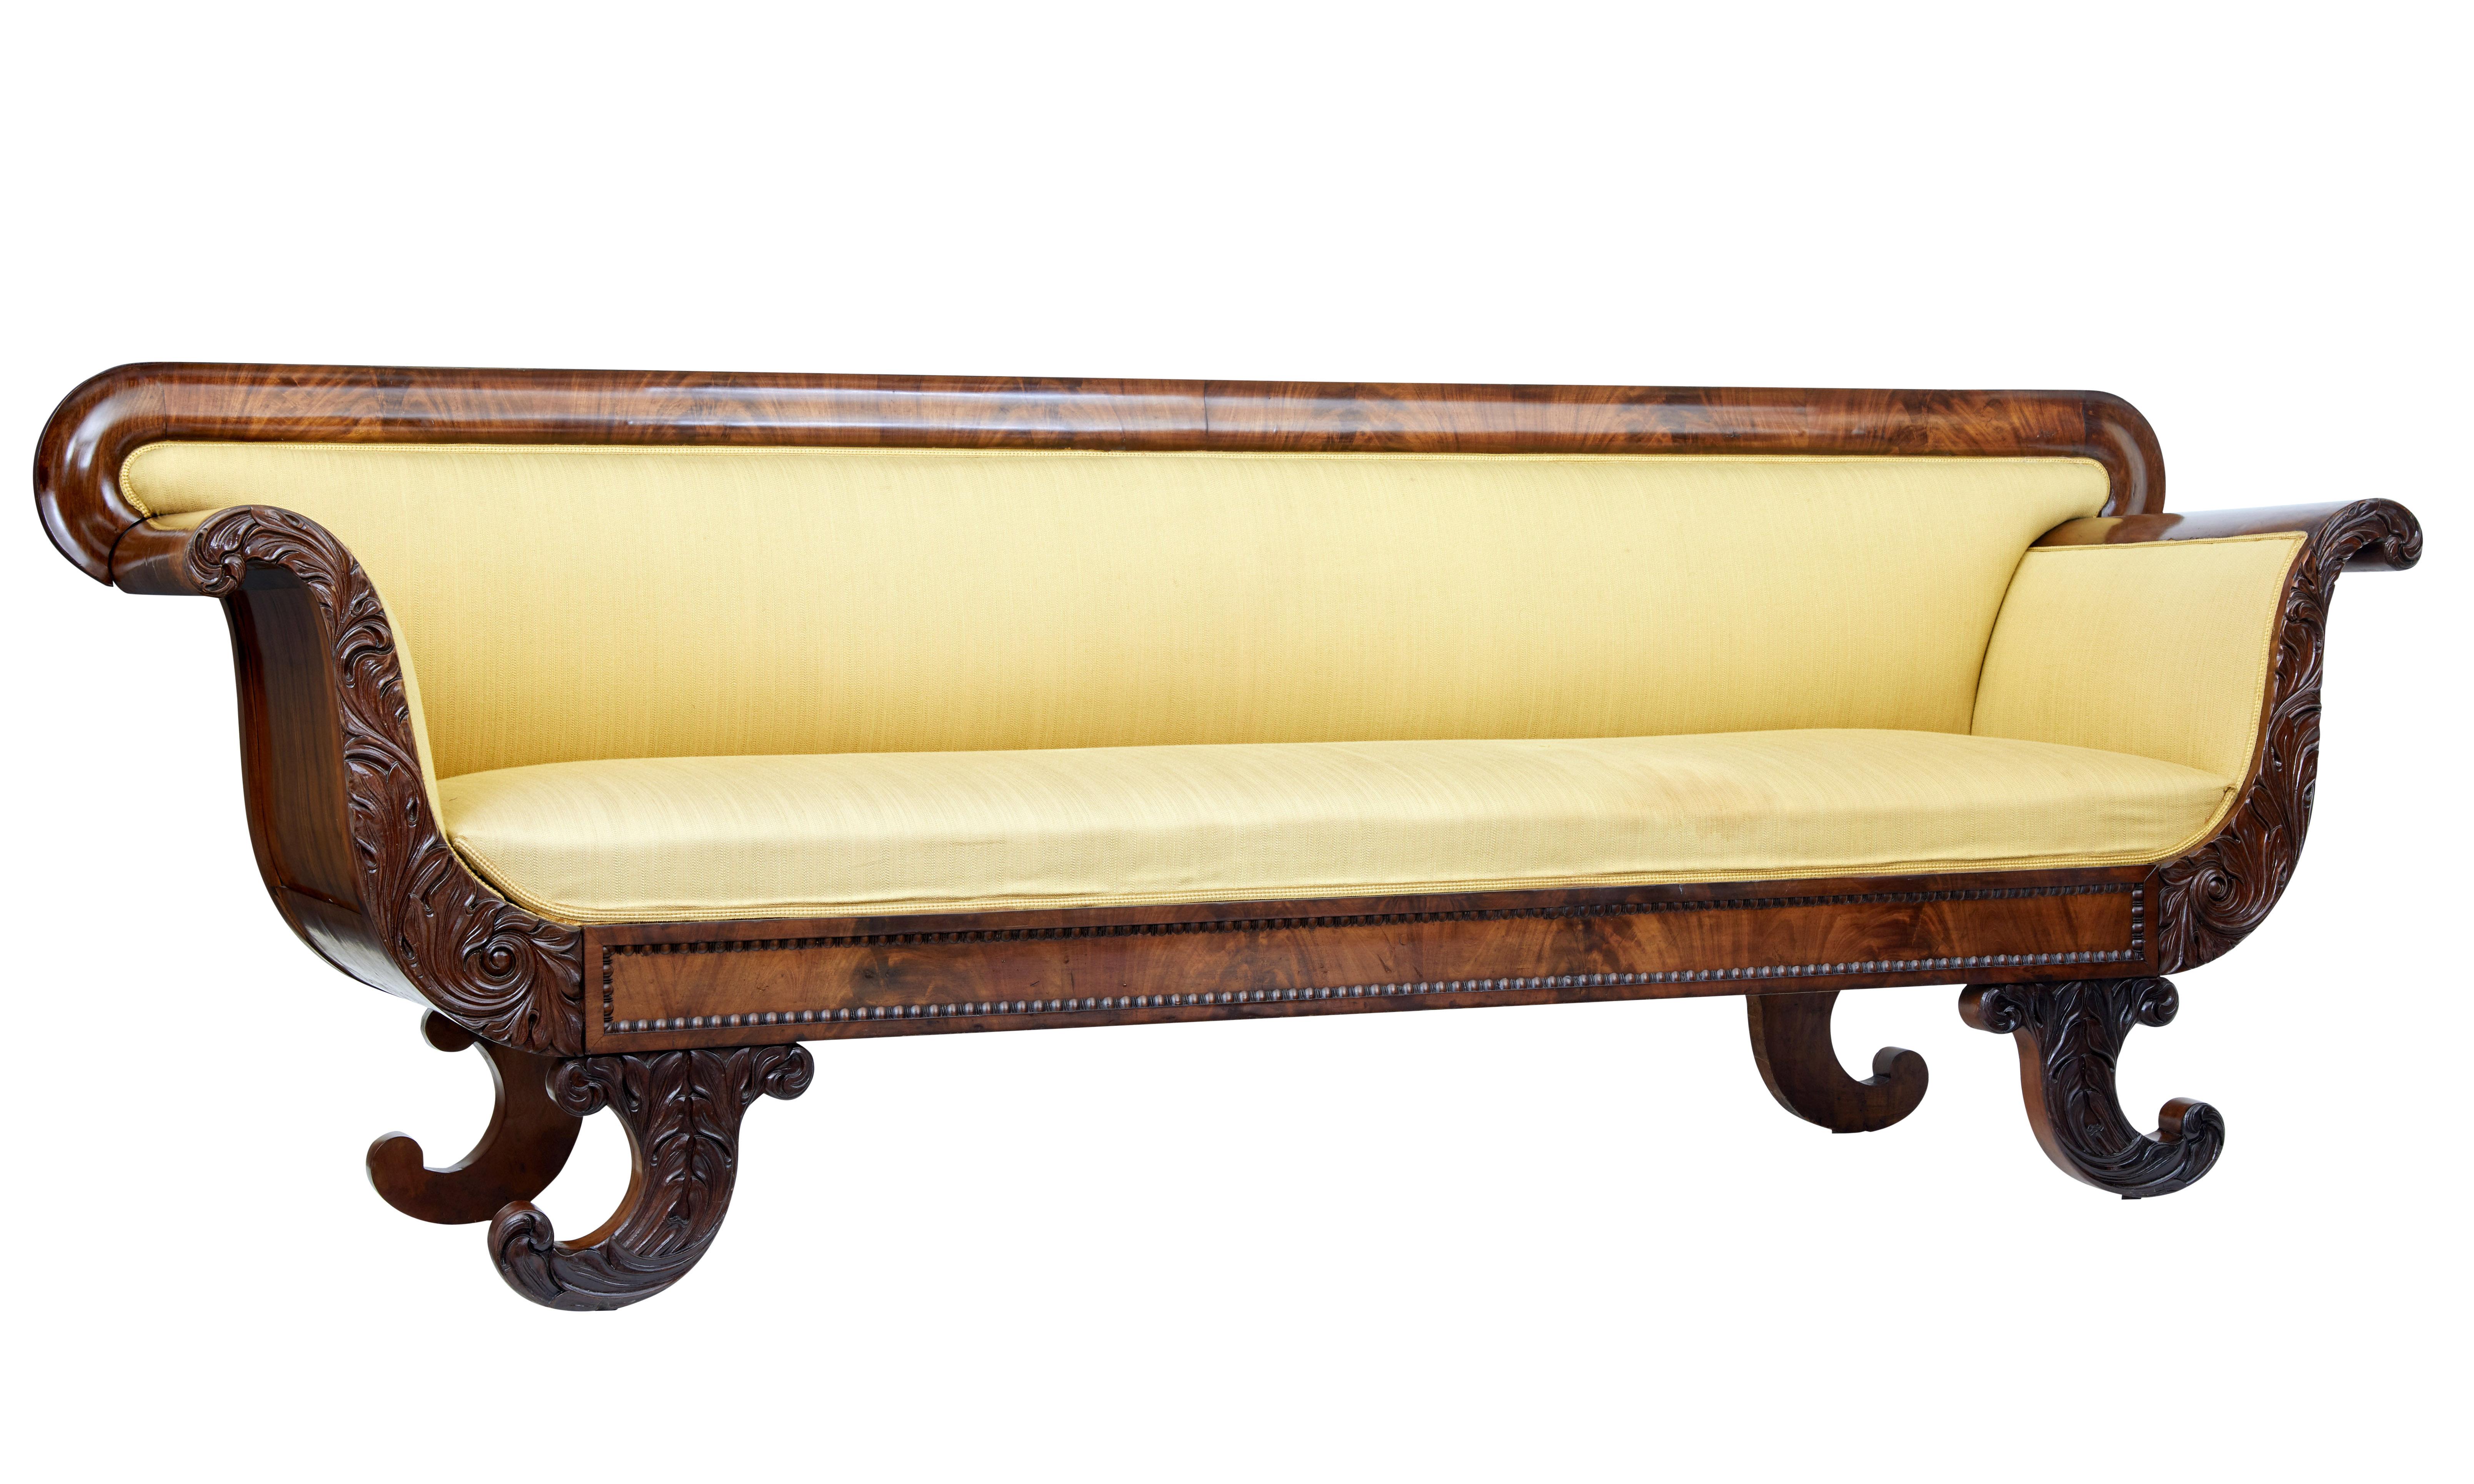 Beautiful Swedish mid-19th century mahogany sofa, circa 1860.

Classic Swedish design with scrolling arms and paneled sides in flame mahogany. Shaped back rest.

Carved acanthus leaves to the front of the arms with a beaded front rail, which is